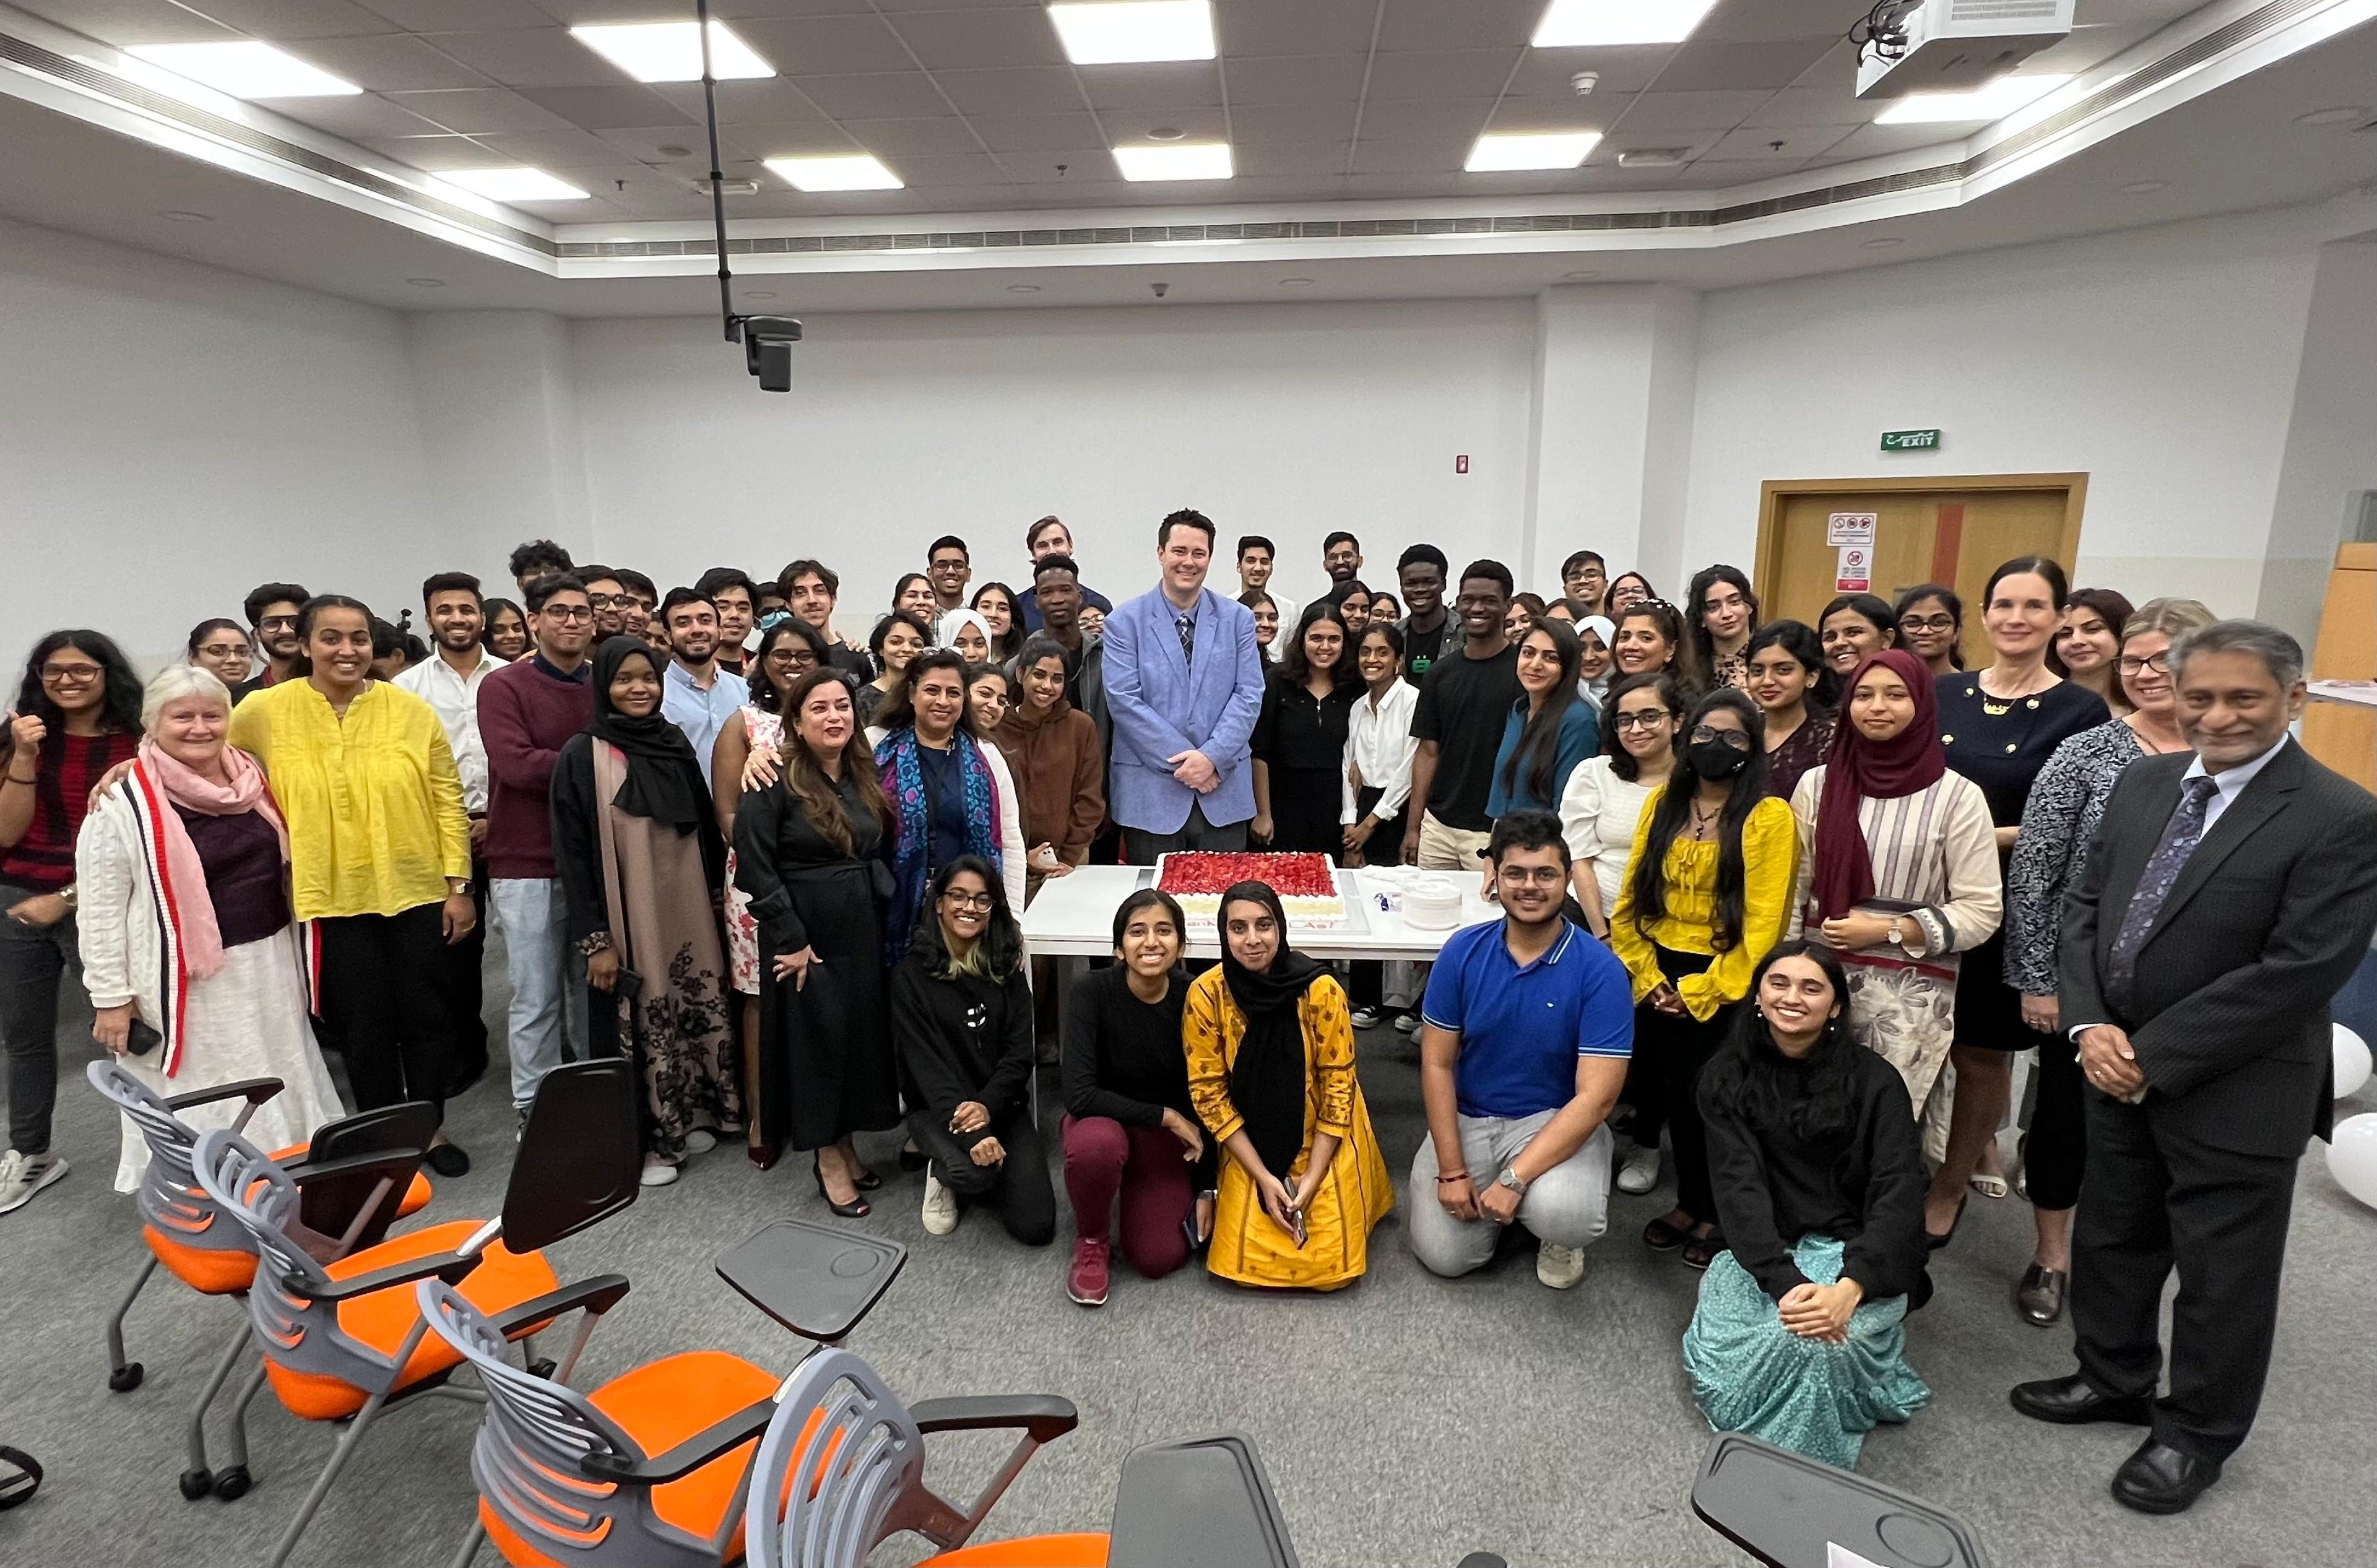 Our Student Learning Assistants are a core part of teaching and learning at Middlesex University Dubai. SLAs are all current students, who are trained to work alongside their lecturers to promote learning and provide academic guidance to peers on their programme.